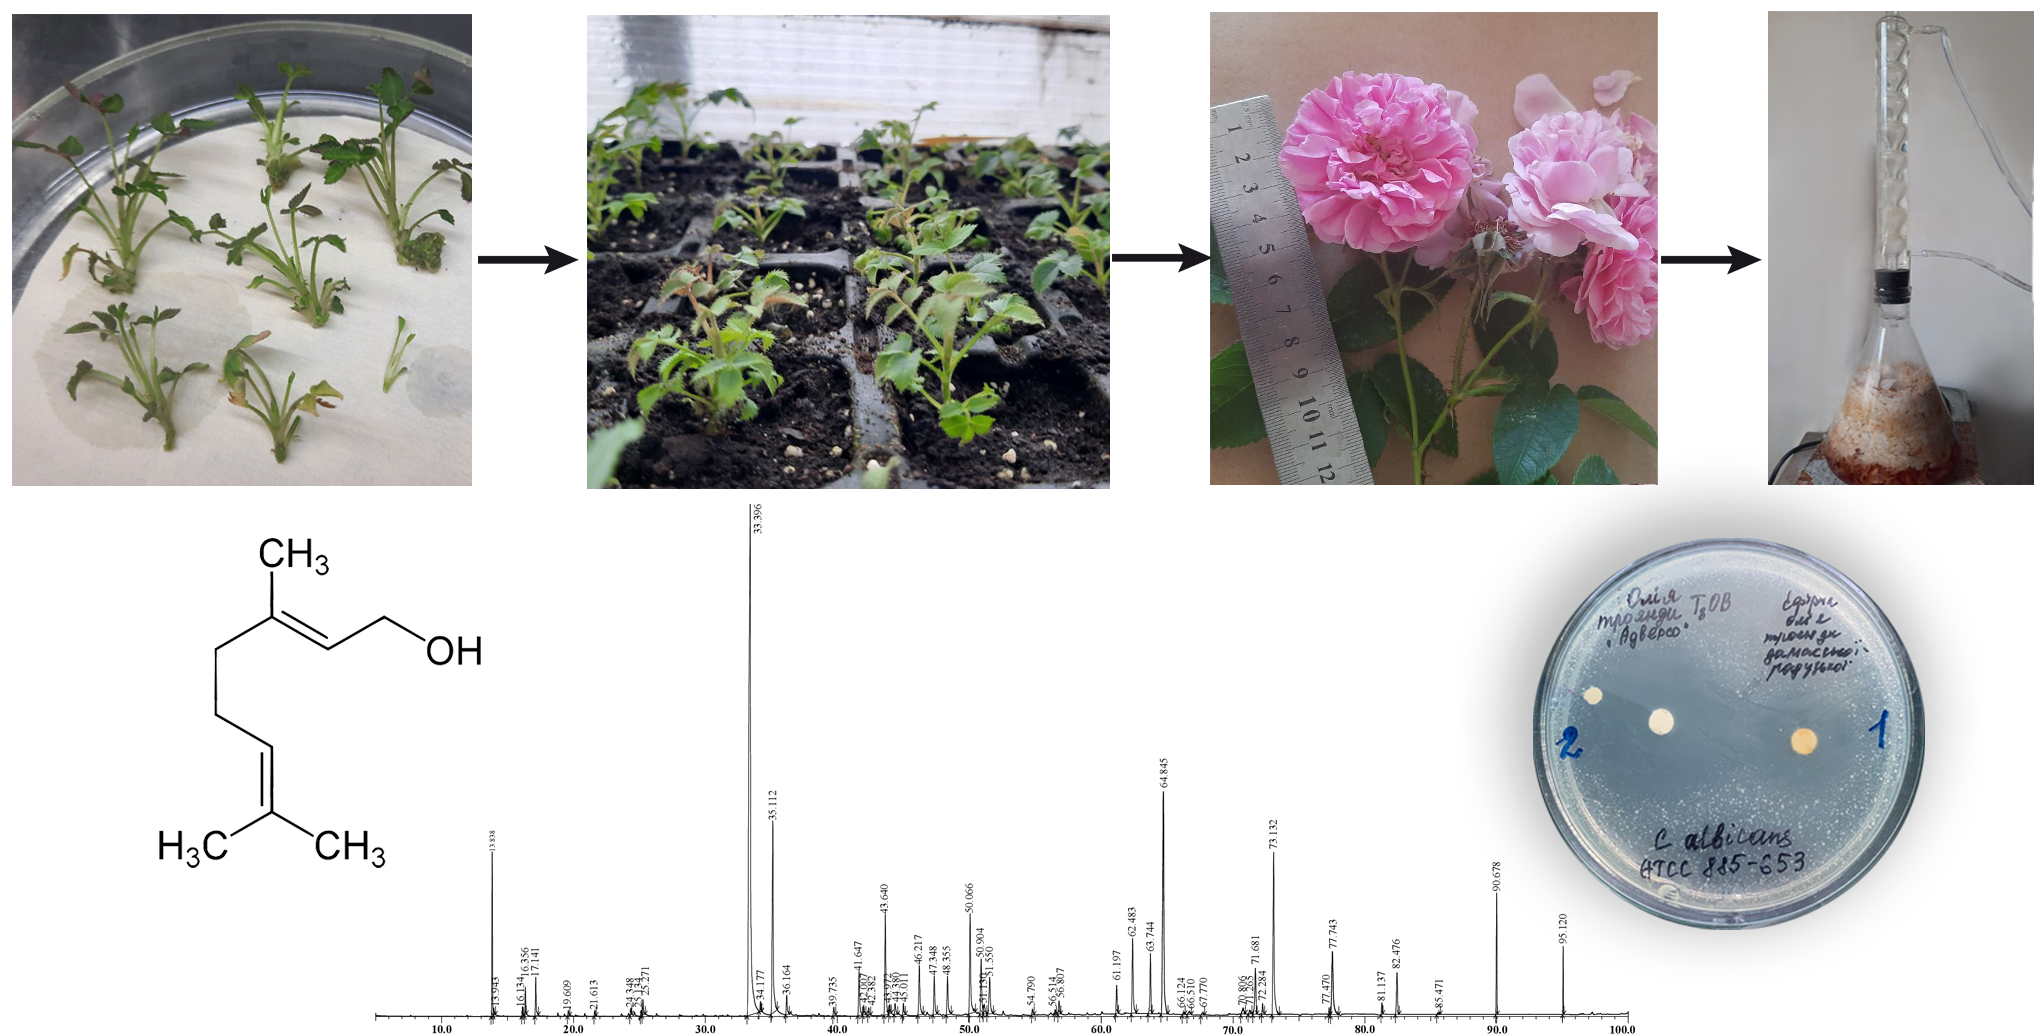 Chemical composition and antimicrobial activity of Rosa Damascena mill. (variety rainbow) from clonal micropropagation